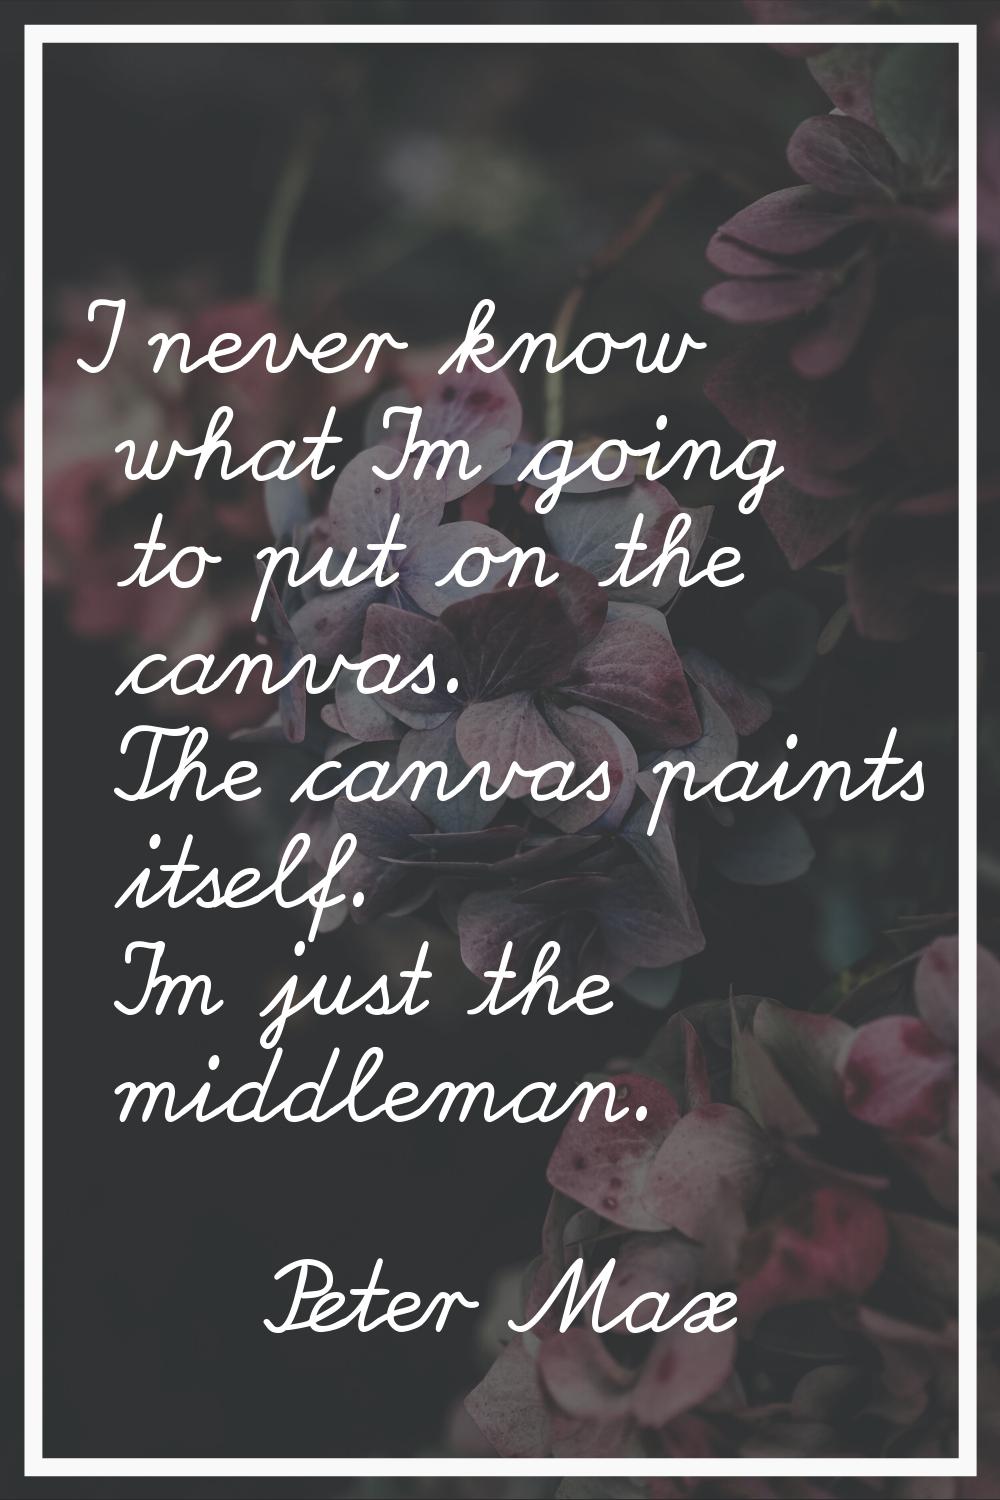 I never know what I'm going to put on the canvas. The canvas paints itself. I'm just the middleman.